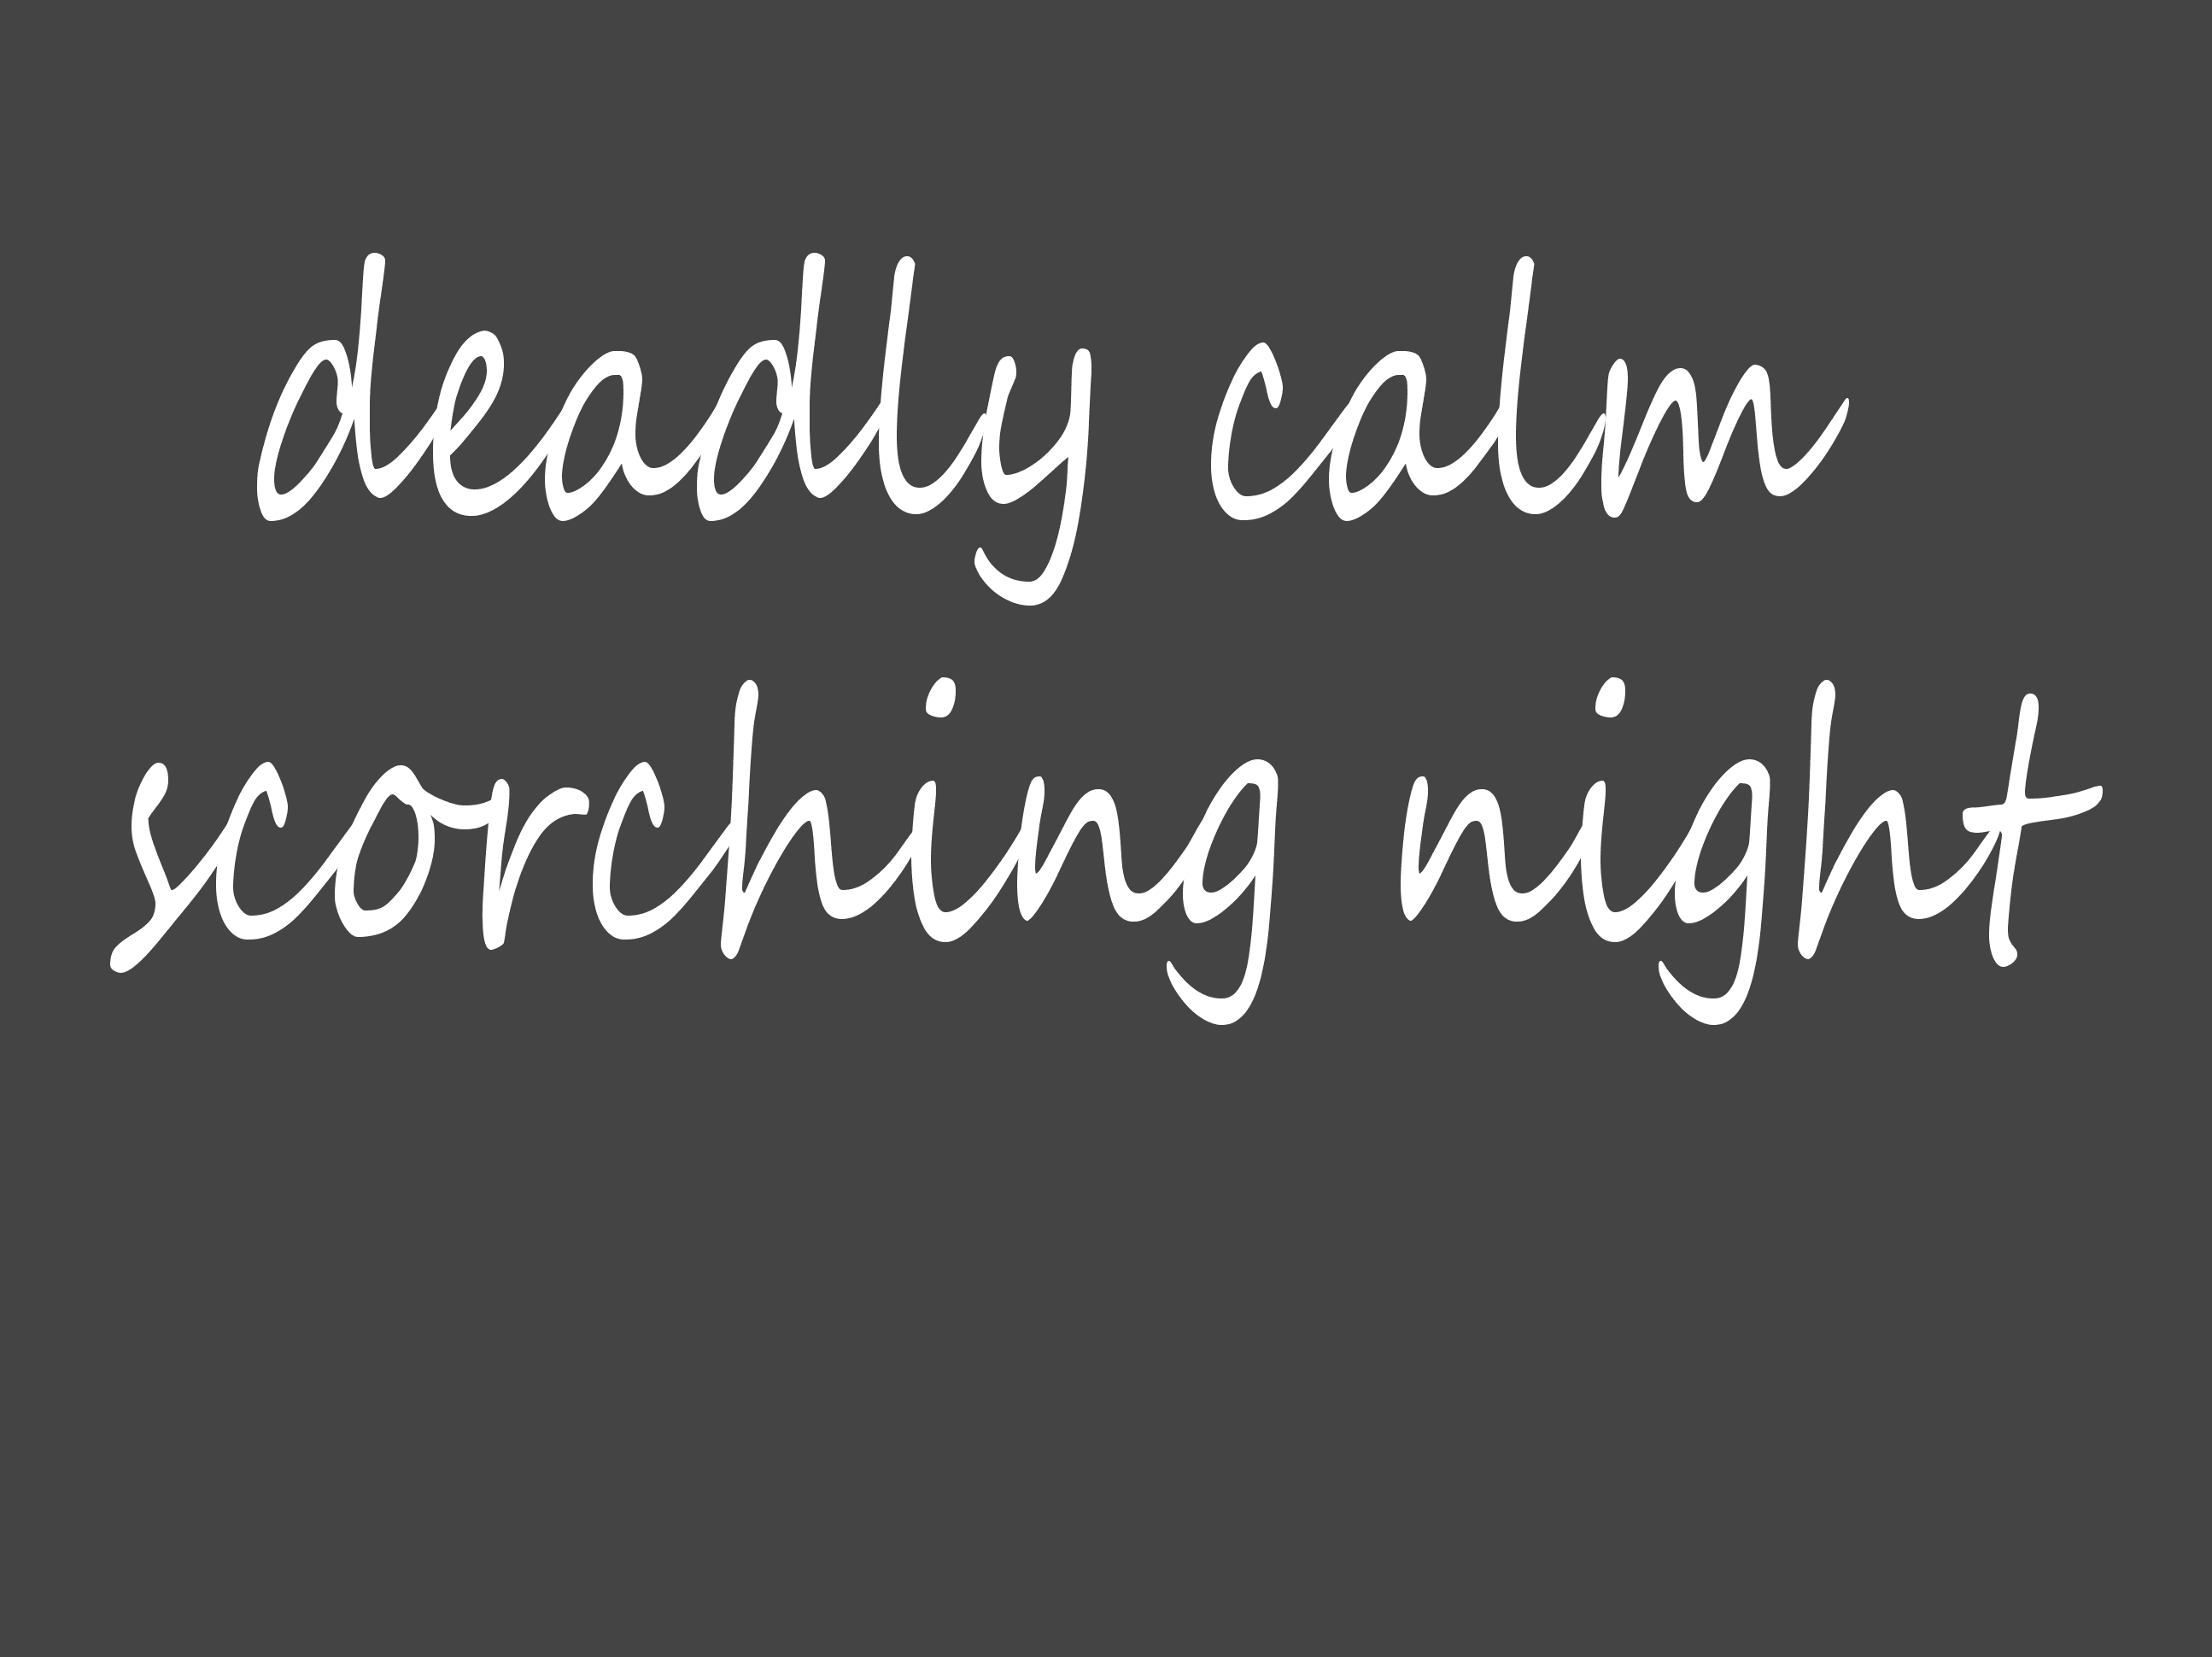 Deadly calm scorching night